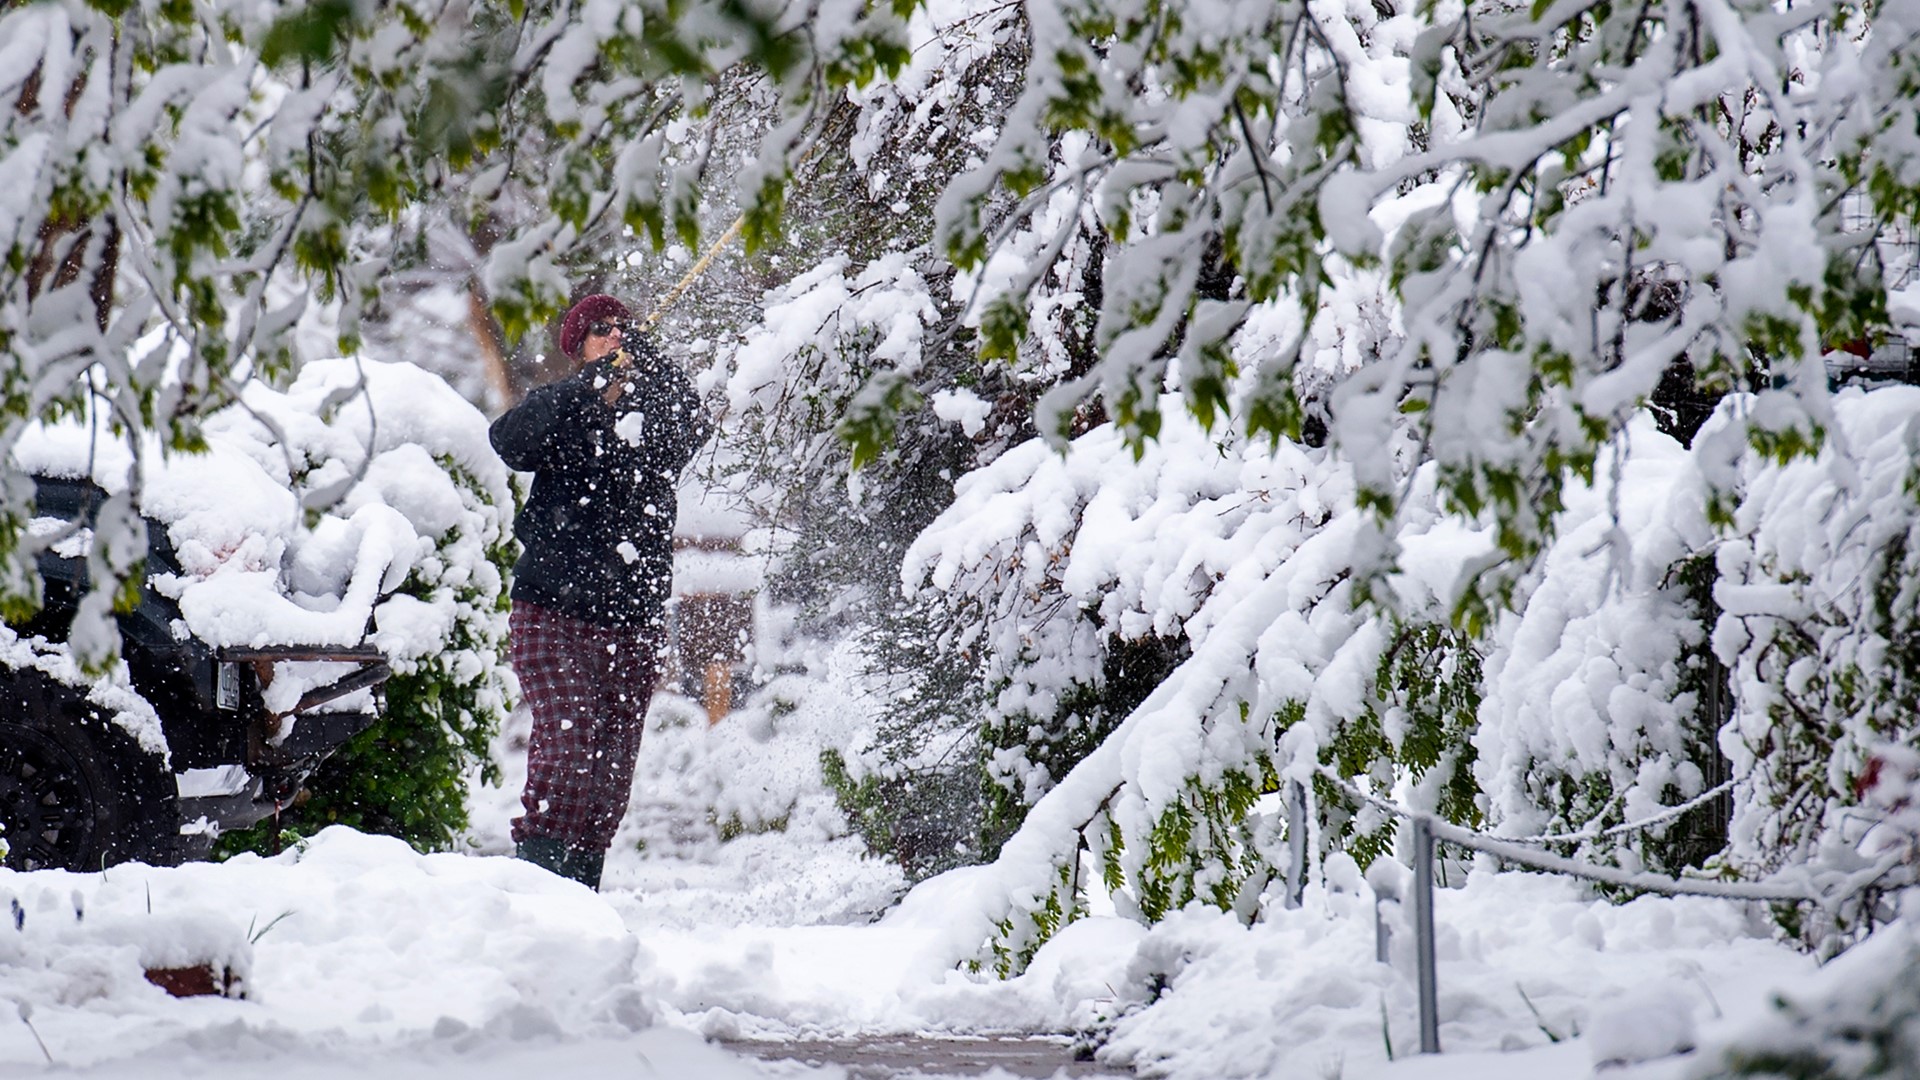 The heavy wet snow from the late-May storm was just too much for many trees across the Denver area.